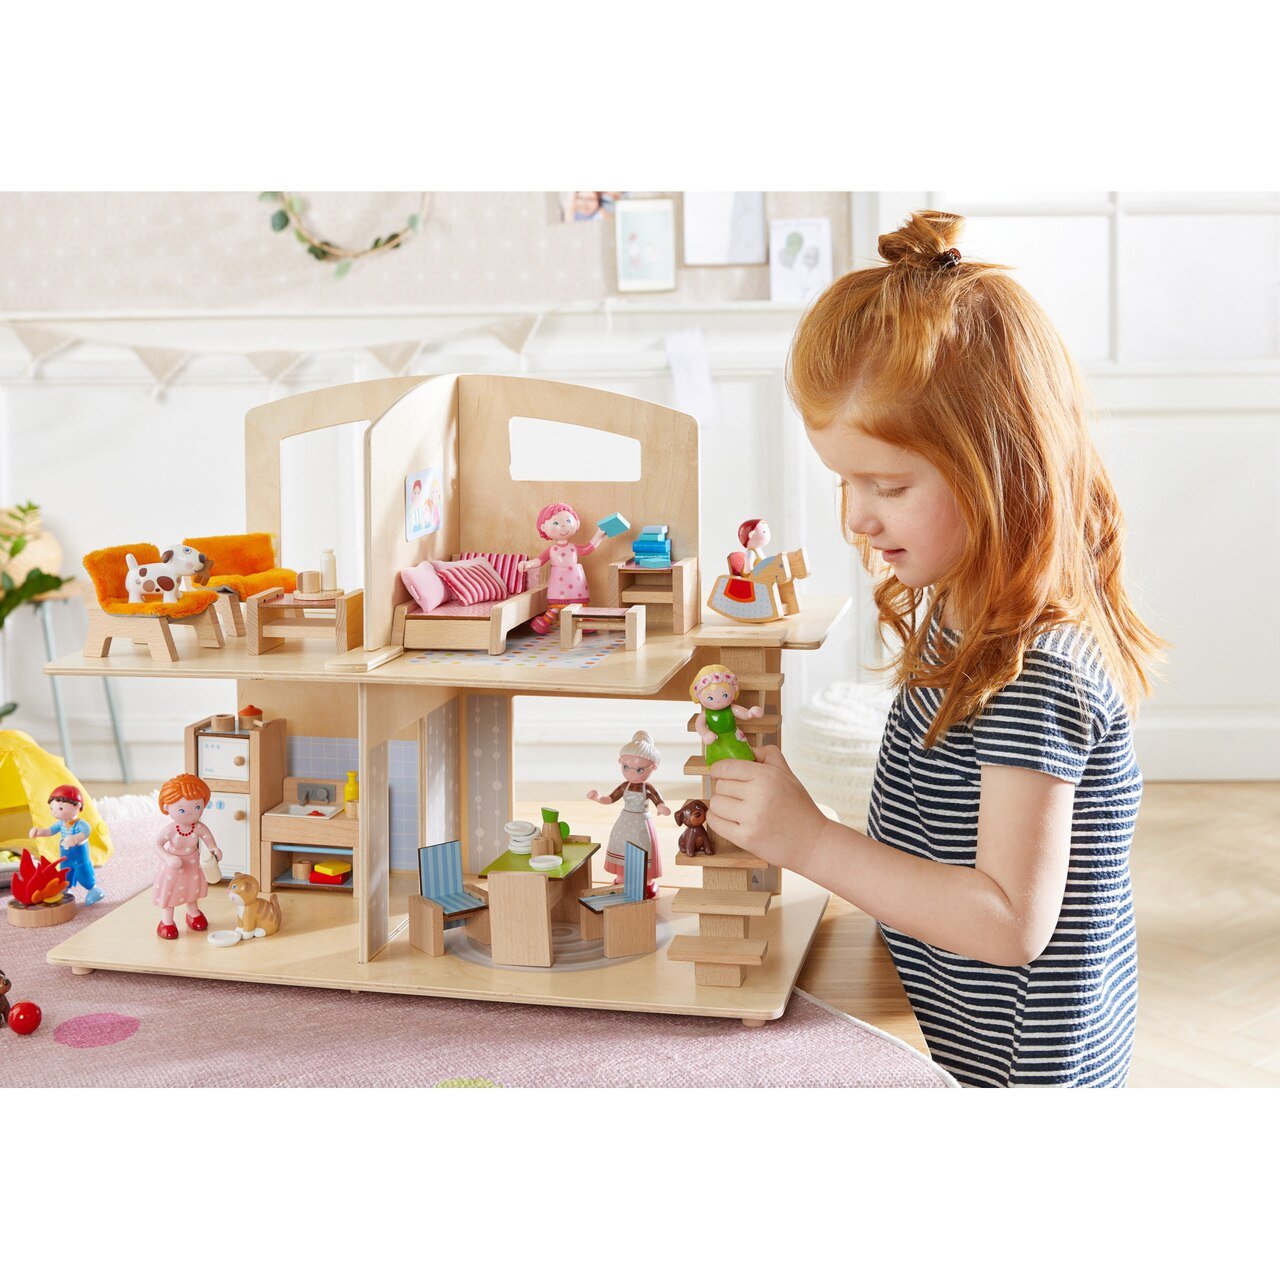 HABA Little Friends Dollhouse Town Villa - Wood Wood Toys Canada's Favourite Montessori Toy Store